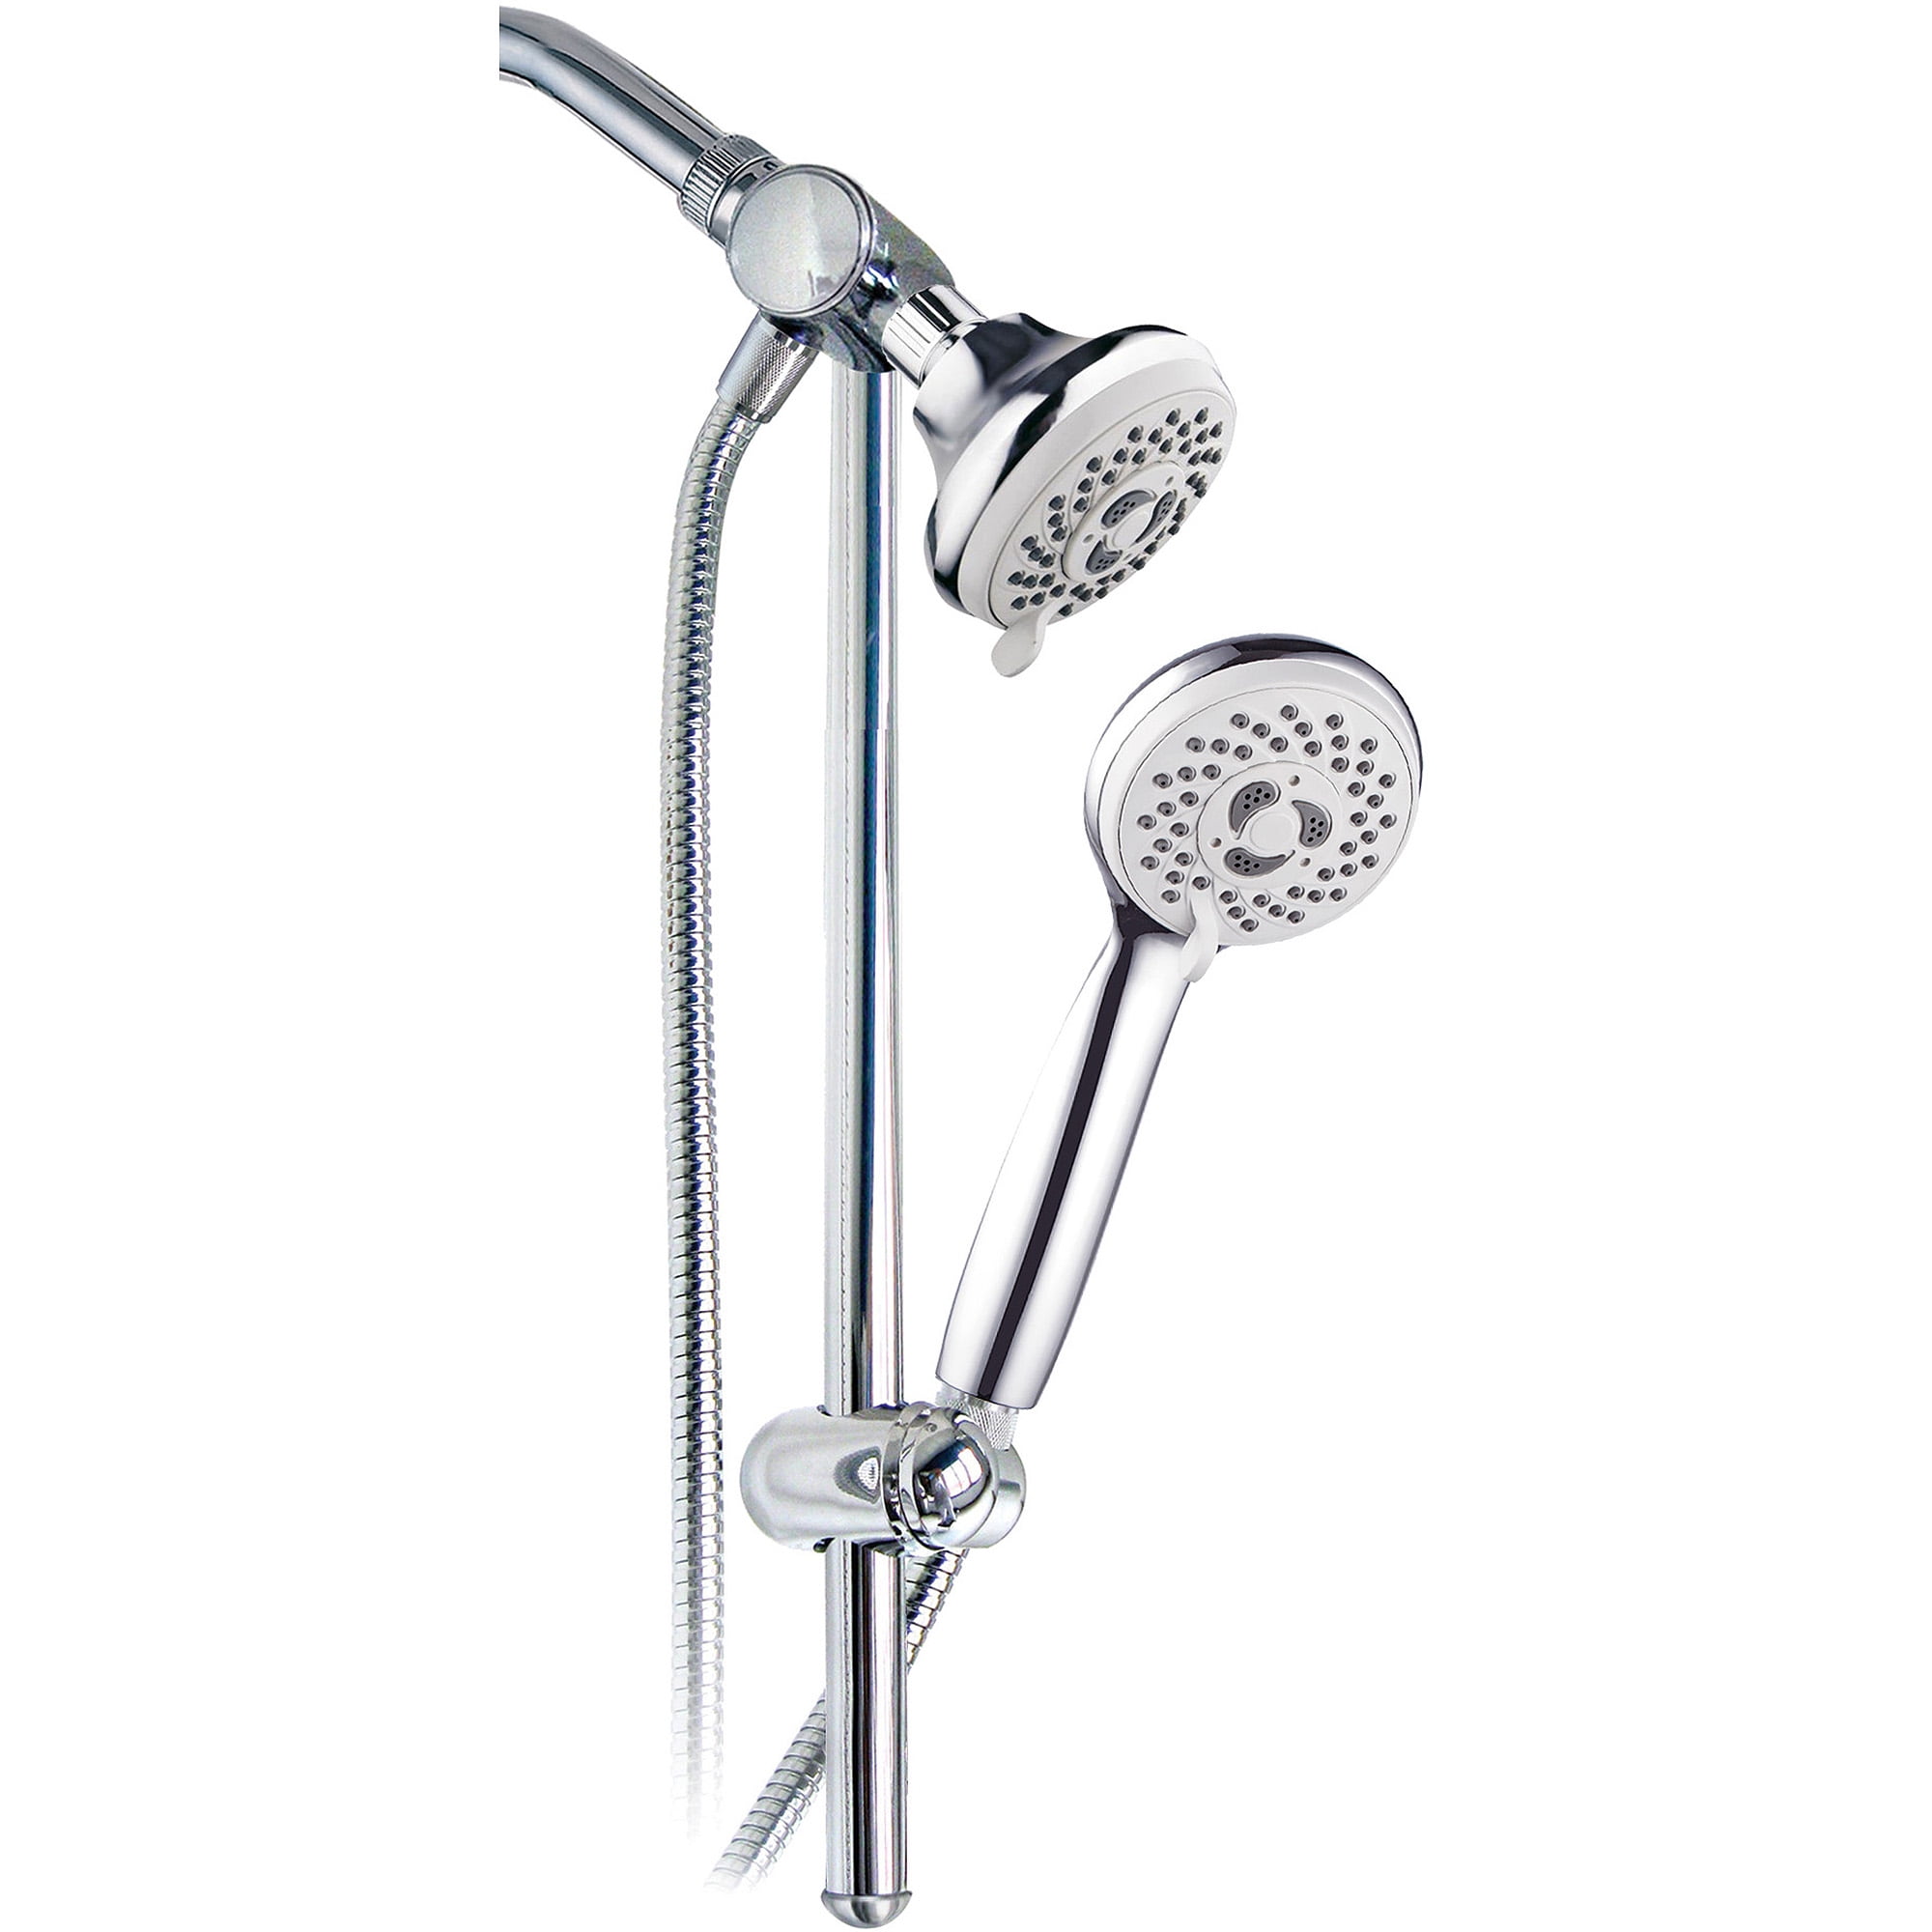 Duttao DT5611CP Drill-Free Slide bar Combo with 5-Function showerhead and 5-Function Hand held Shower Chrome